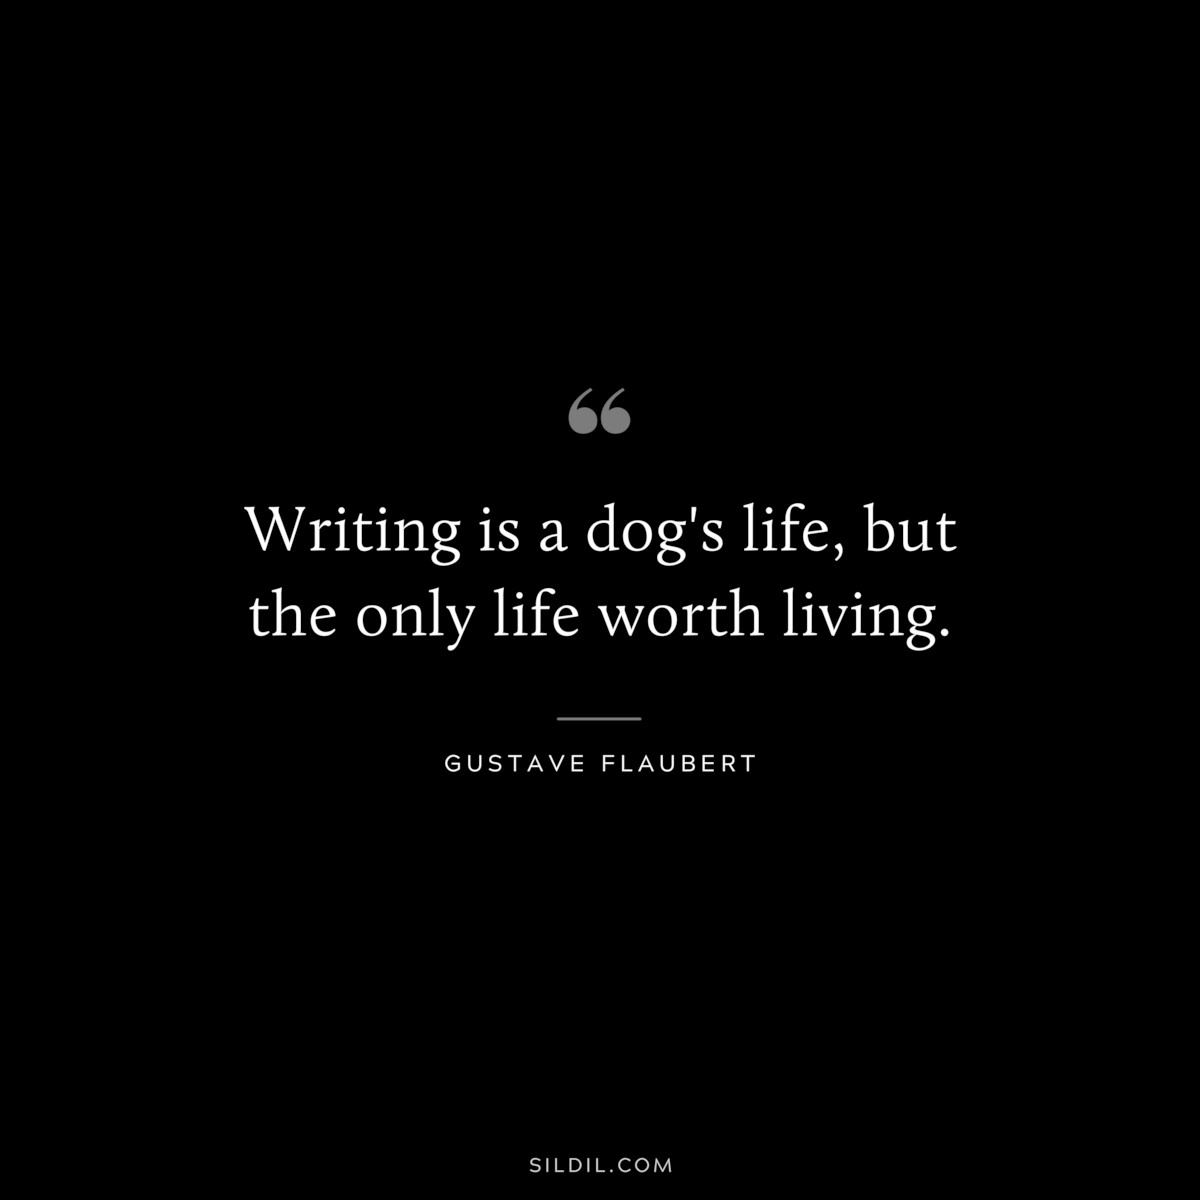 Writing is a dog's life, but the only life worth living. ― Gustave Flaubert